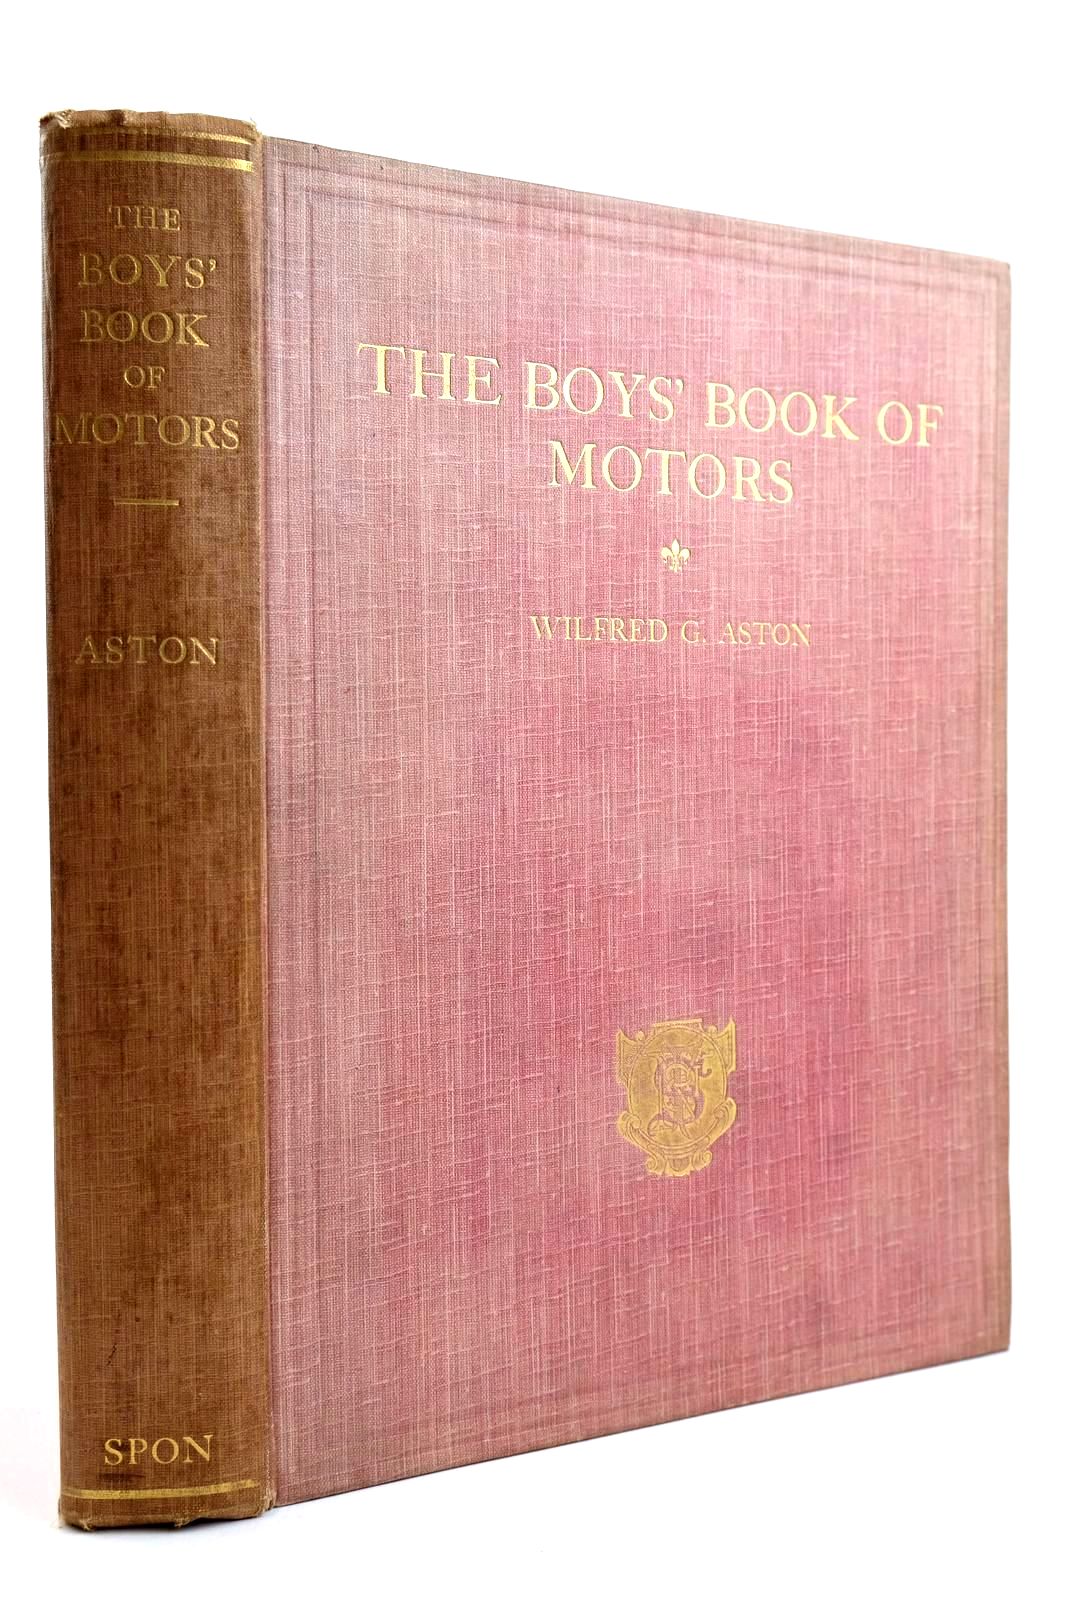 Photo of THE BOYS' BOOK OF MOTORS- Stock Number: 2133934